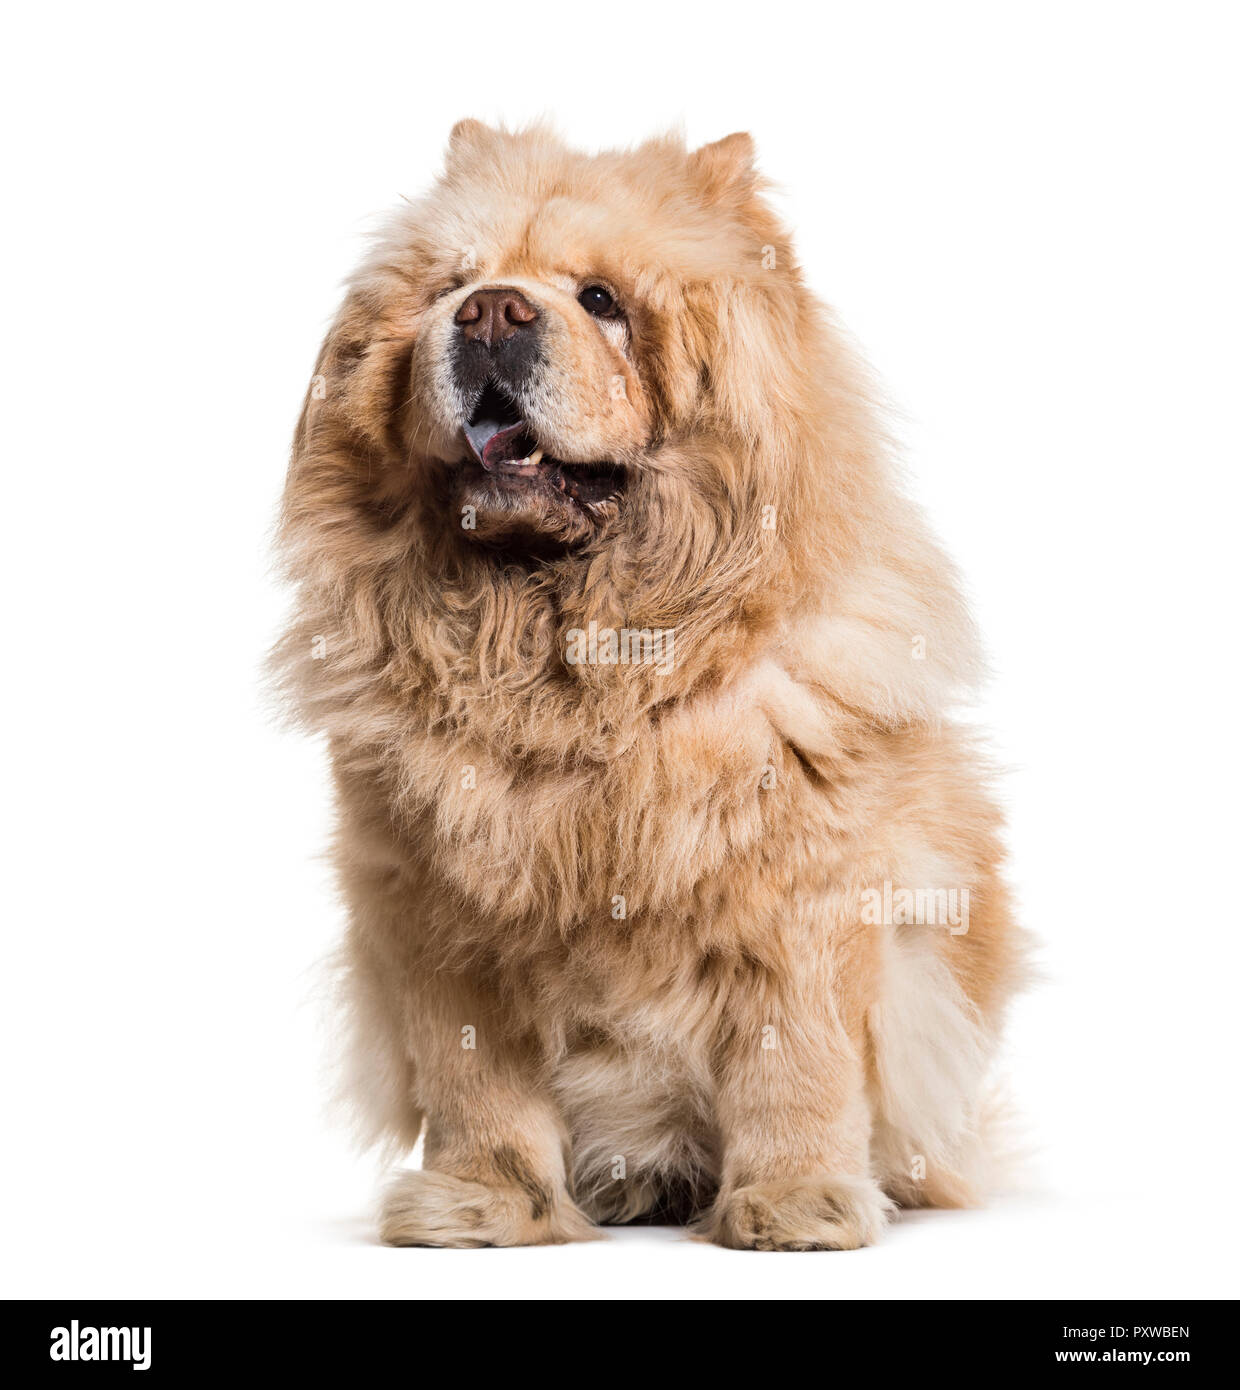 Chow chow dog, 8 years old, sitting against white background Stock Photo